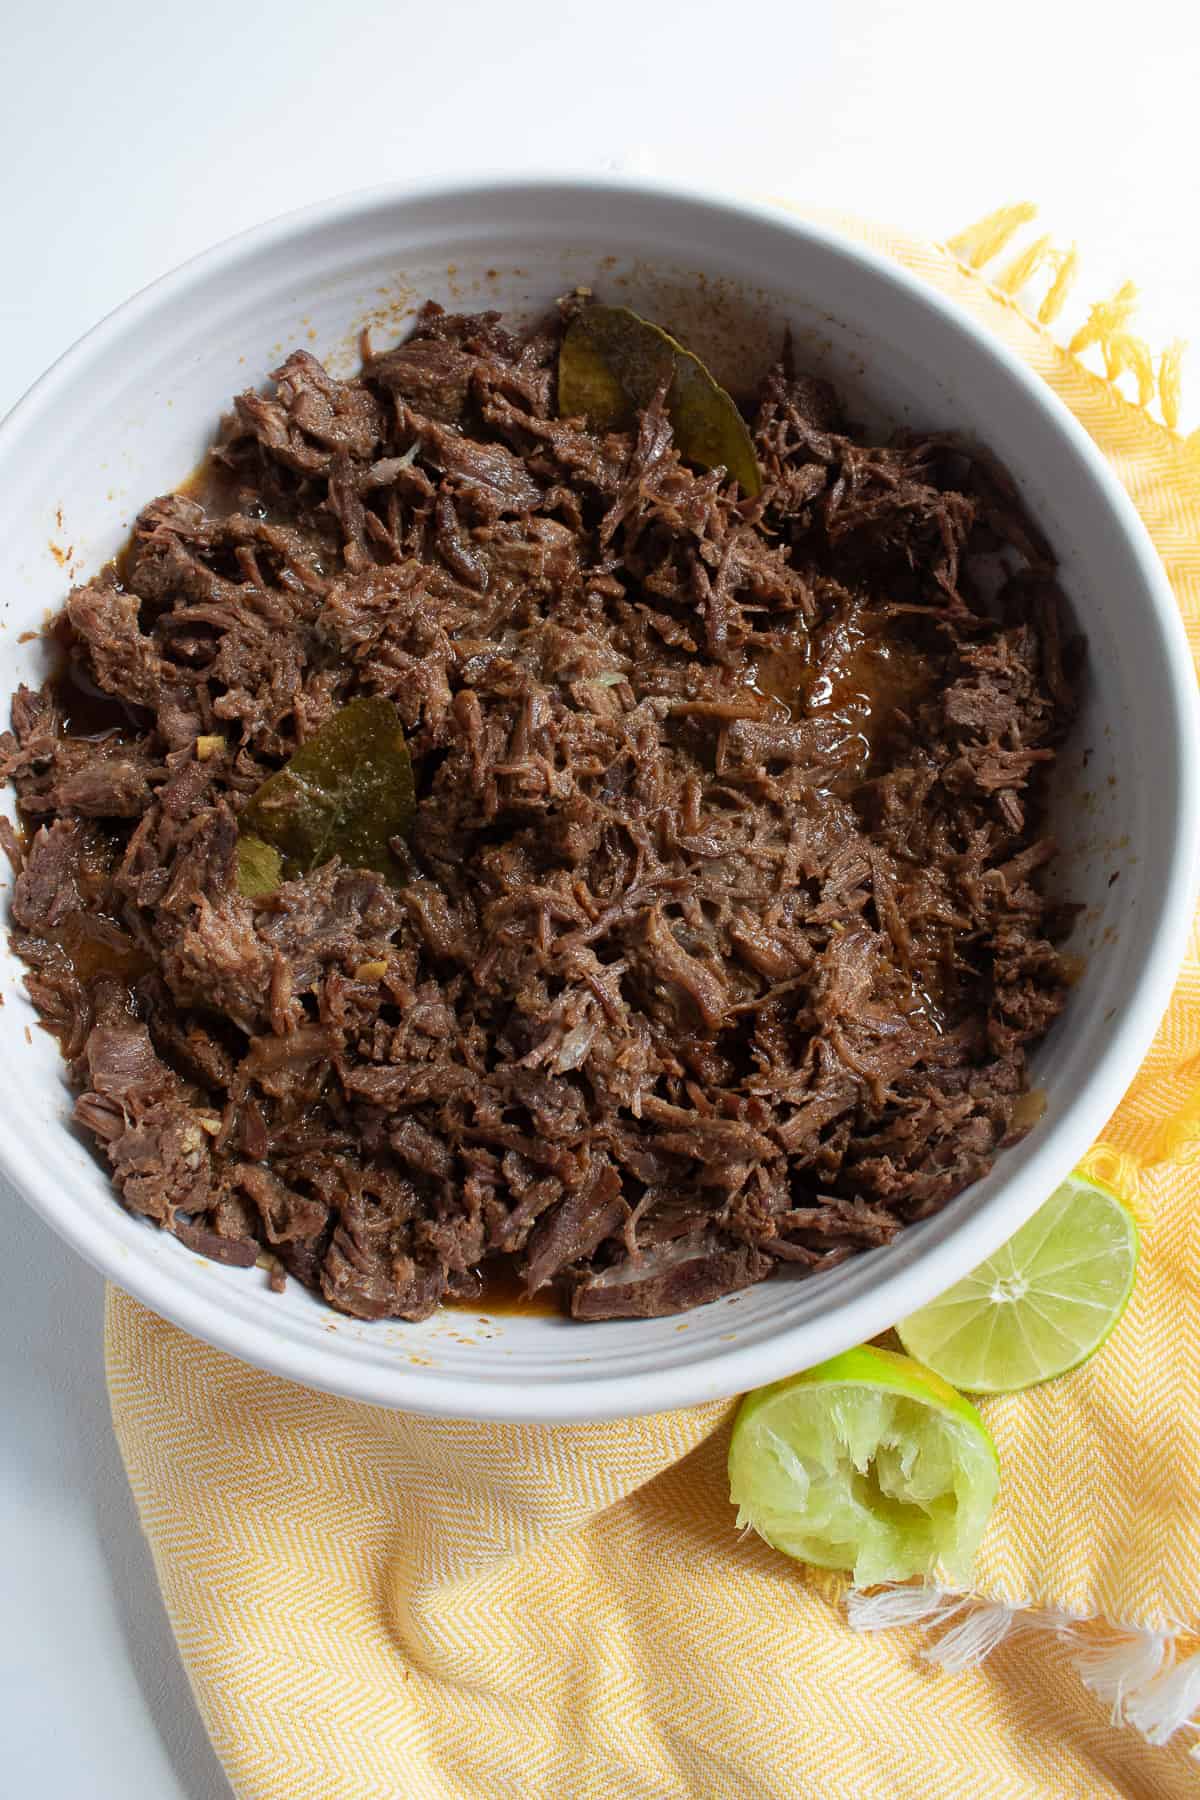 The shredded beef is coated with the finished sauce in a white bowl.